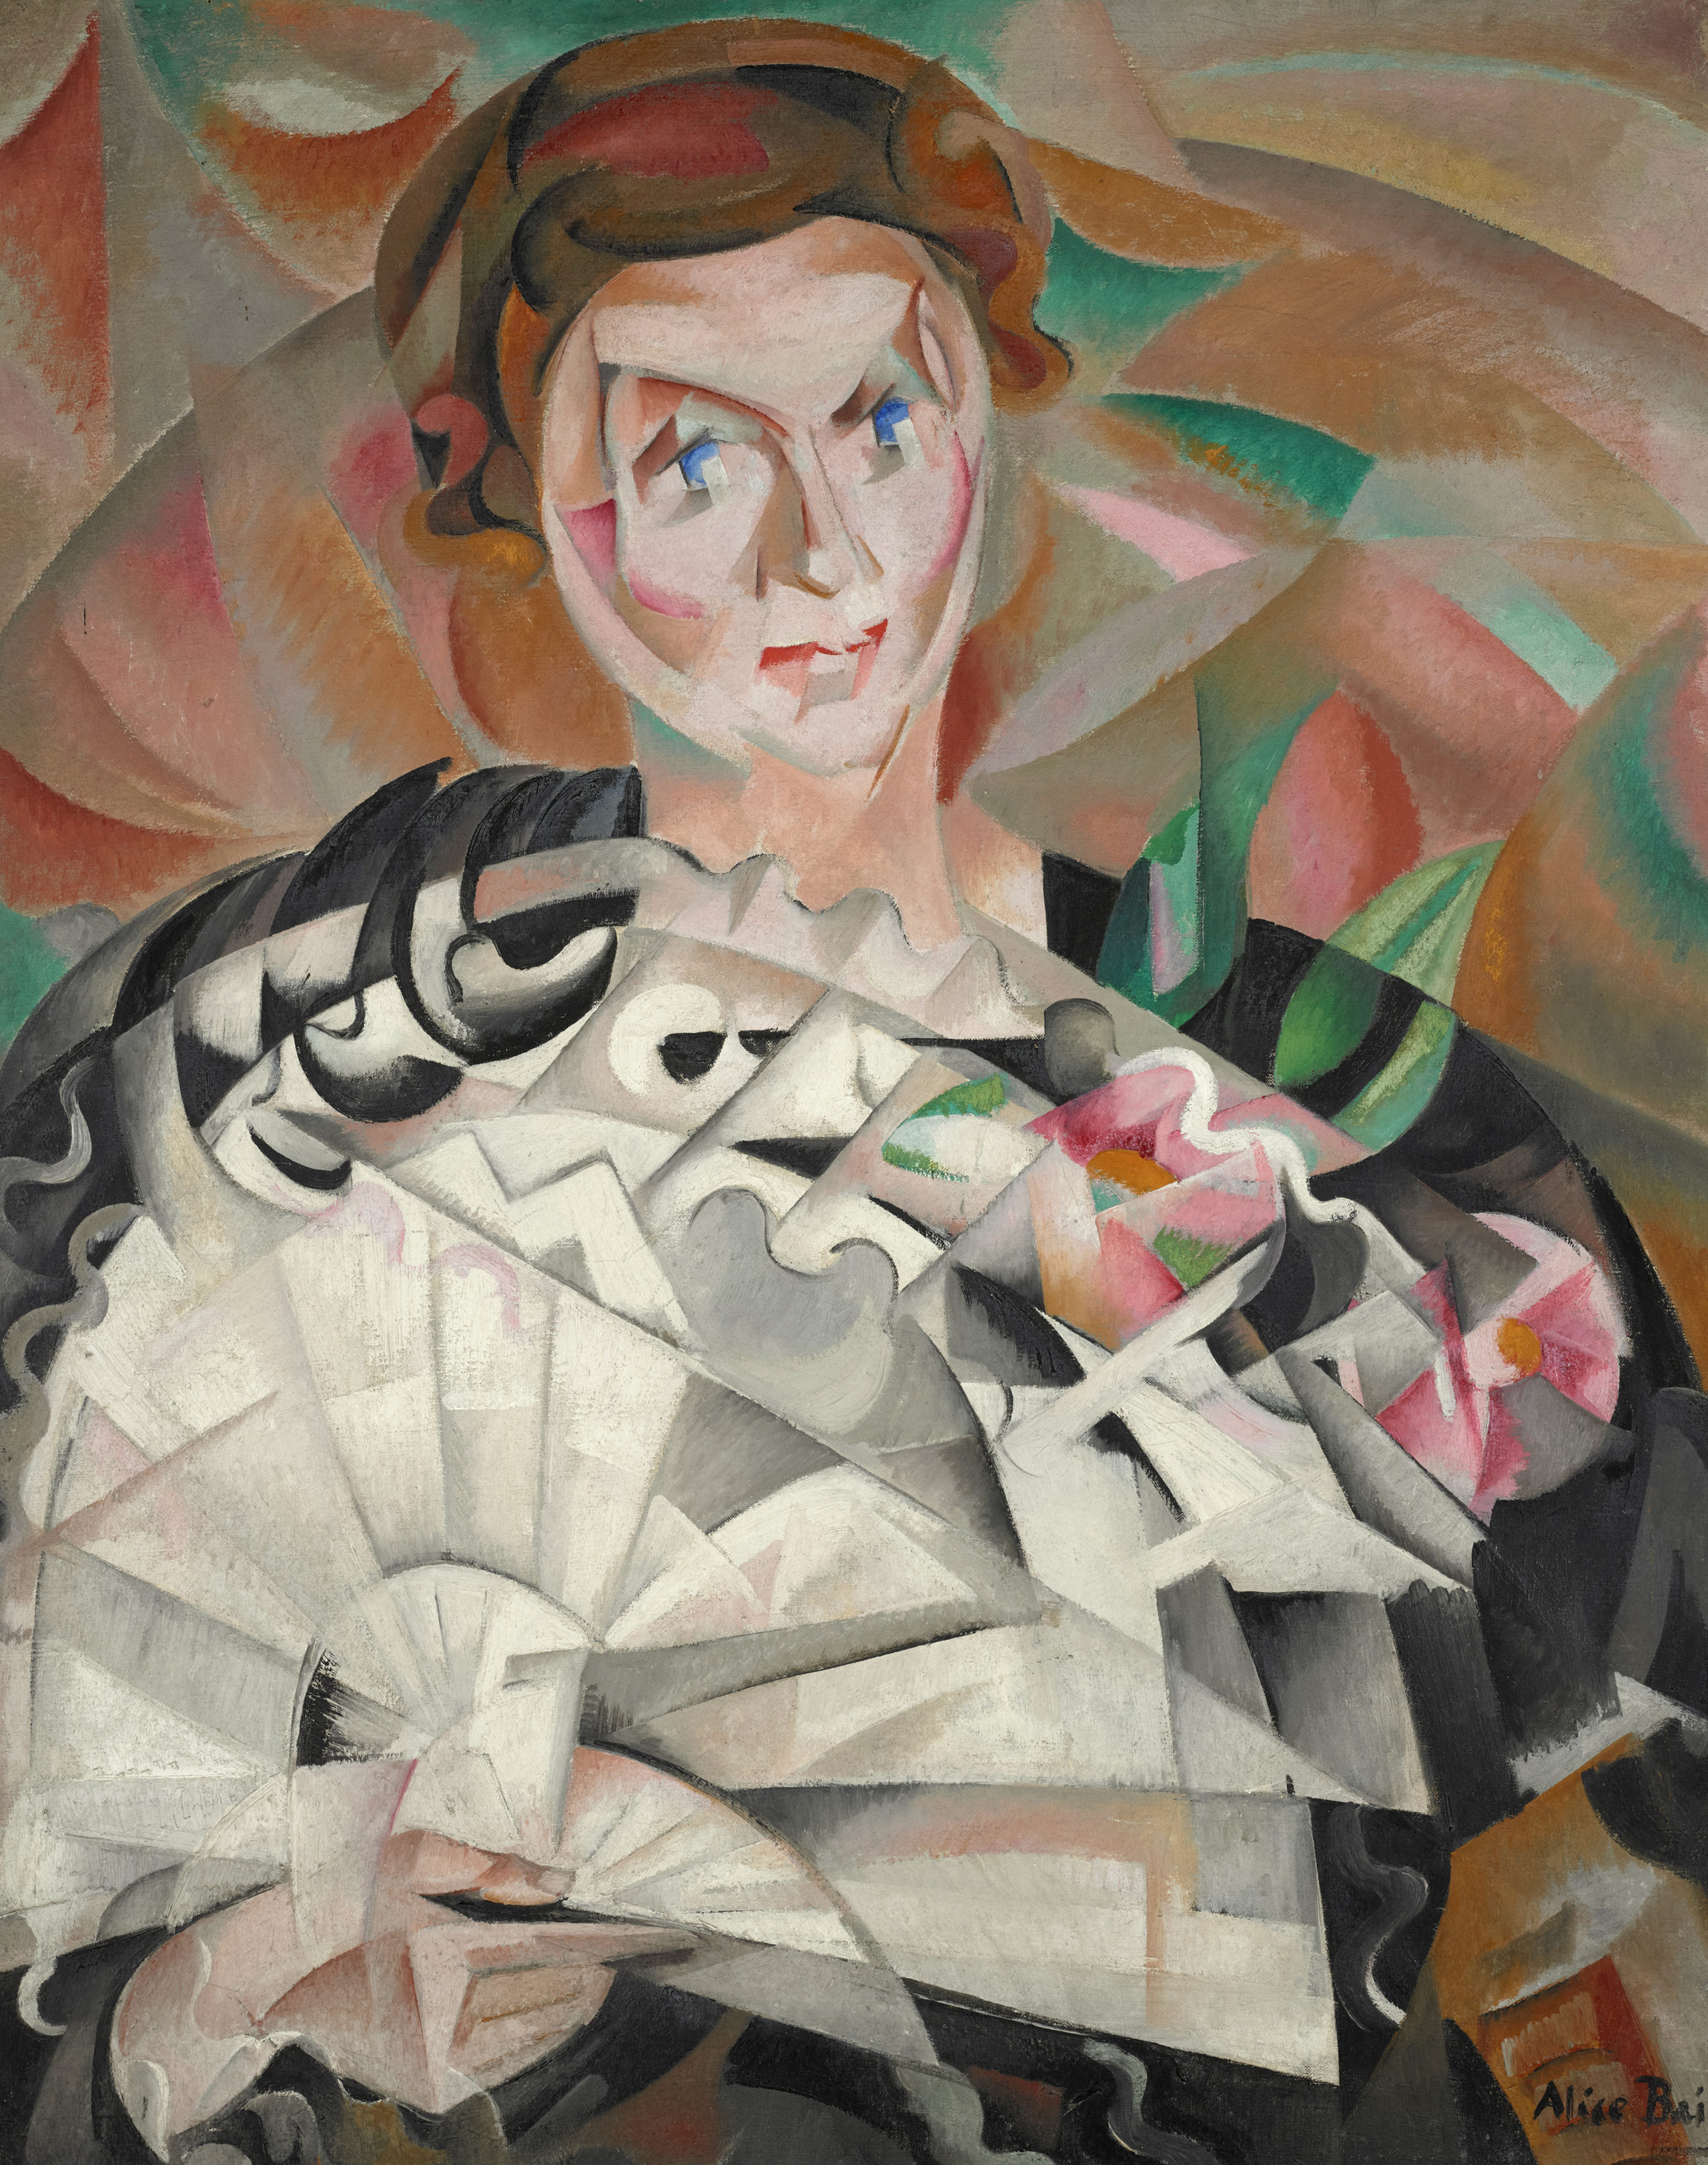 Alice Bailly, Jeu d’éventail (Playing with a Fan) or Femme à l’éventail (Woman with a Fan), 1913